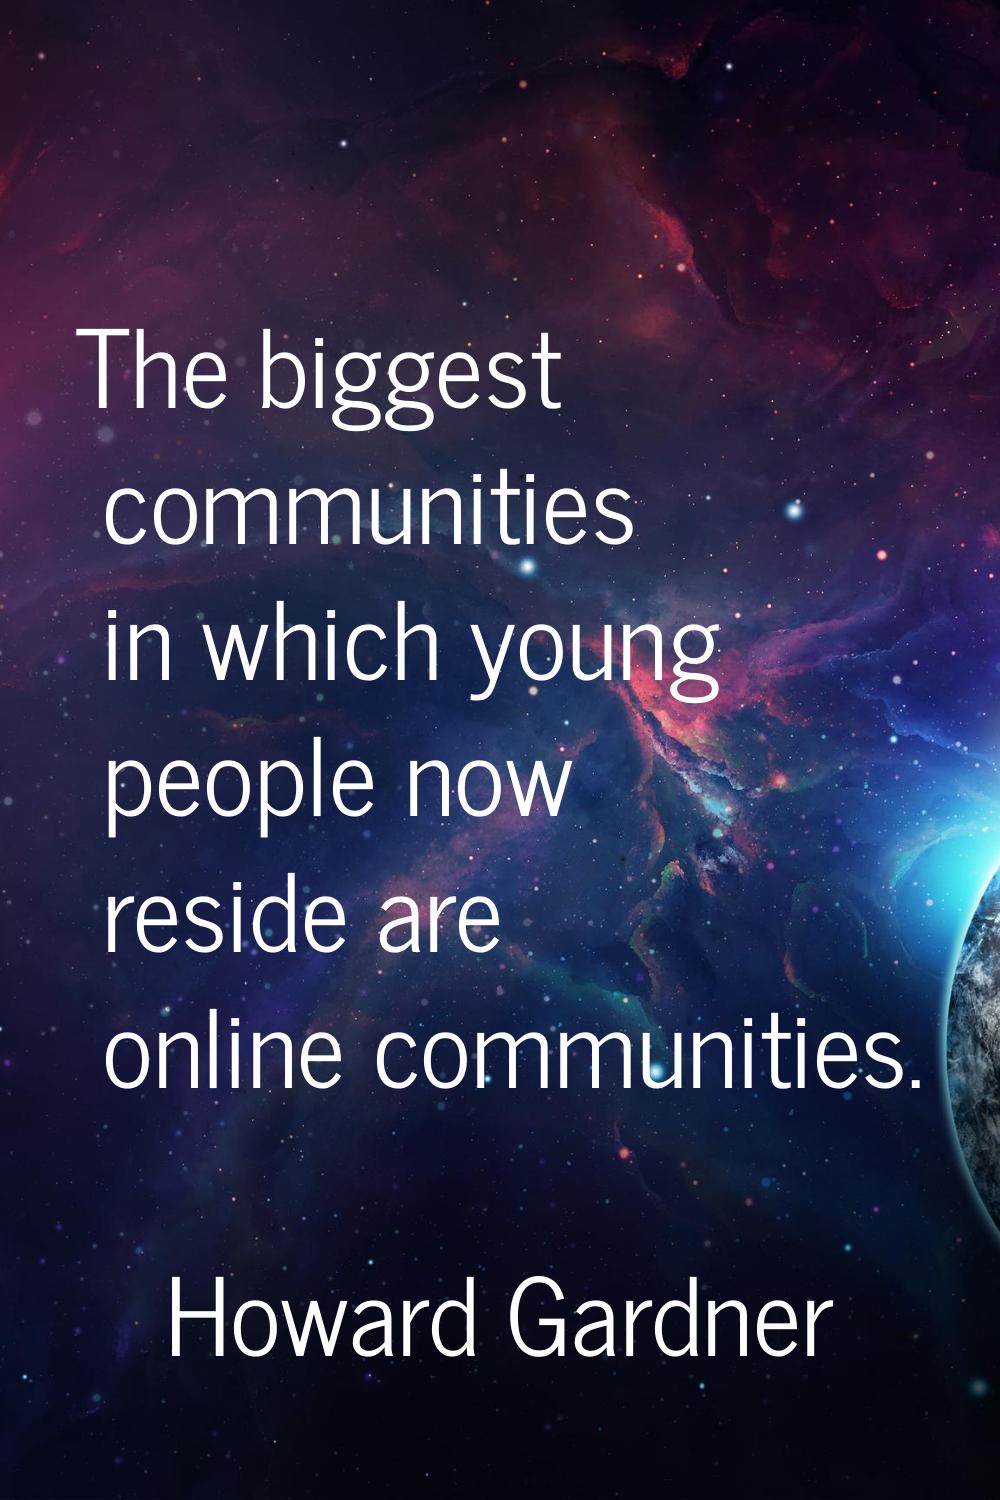 The biggest communities in which young people now reside are online communities.